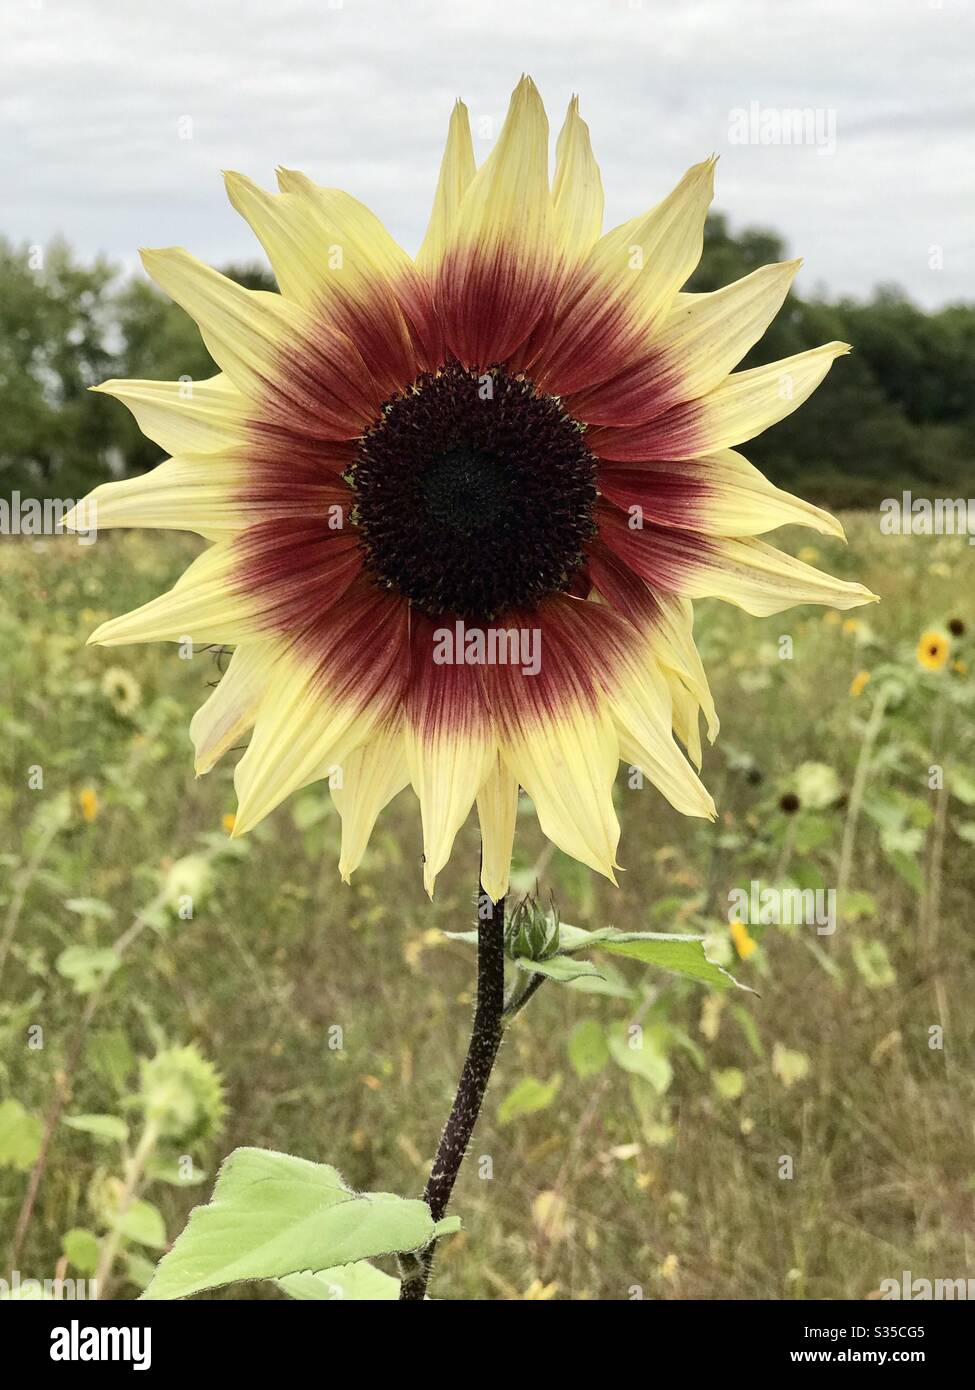 Red and yellow sunflower in a field Stock Photo